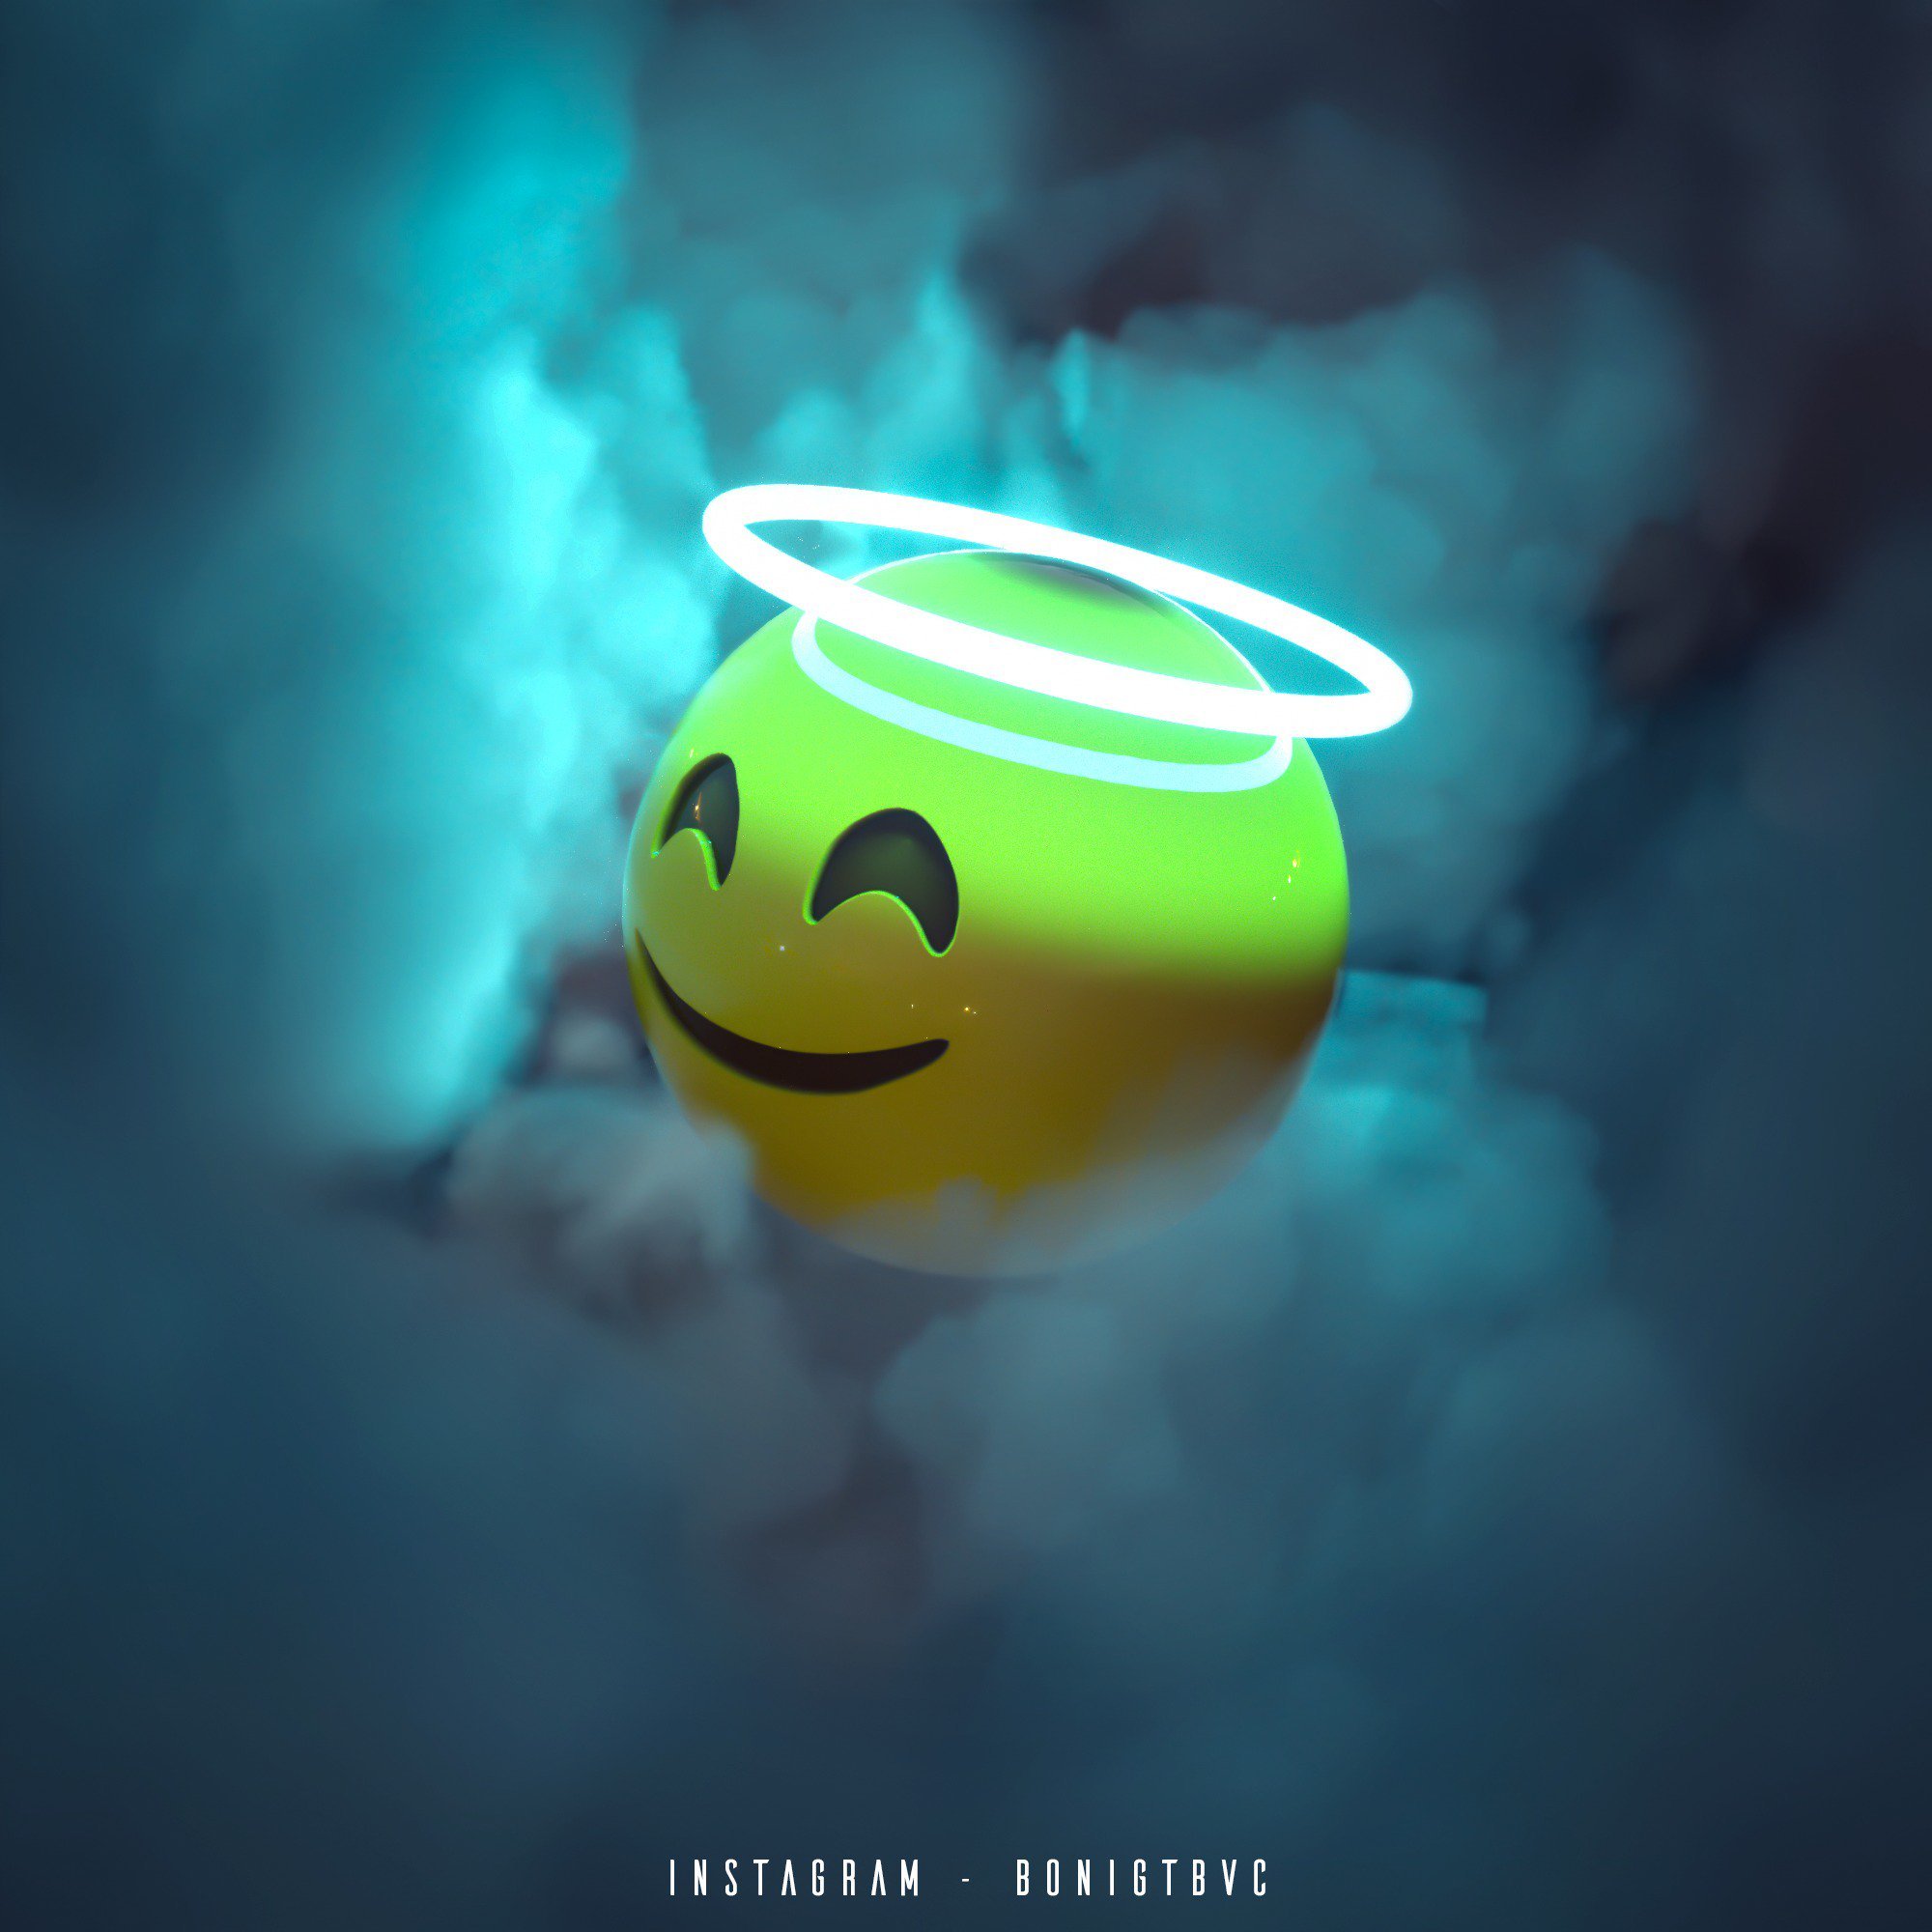 adxmboni part of the #EmojiSeries The Angel Emoji The goal of Emoji Series is to improve overall in Cinema 4D RT + FAV if you like it!